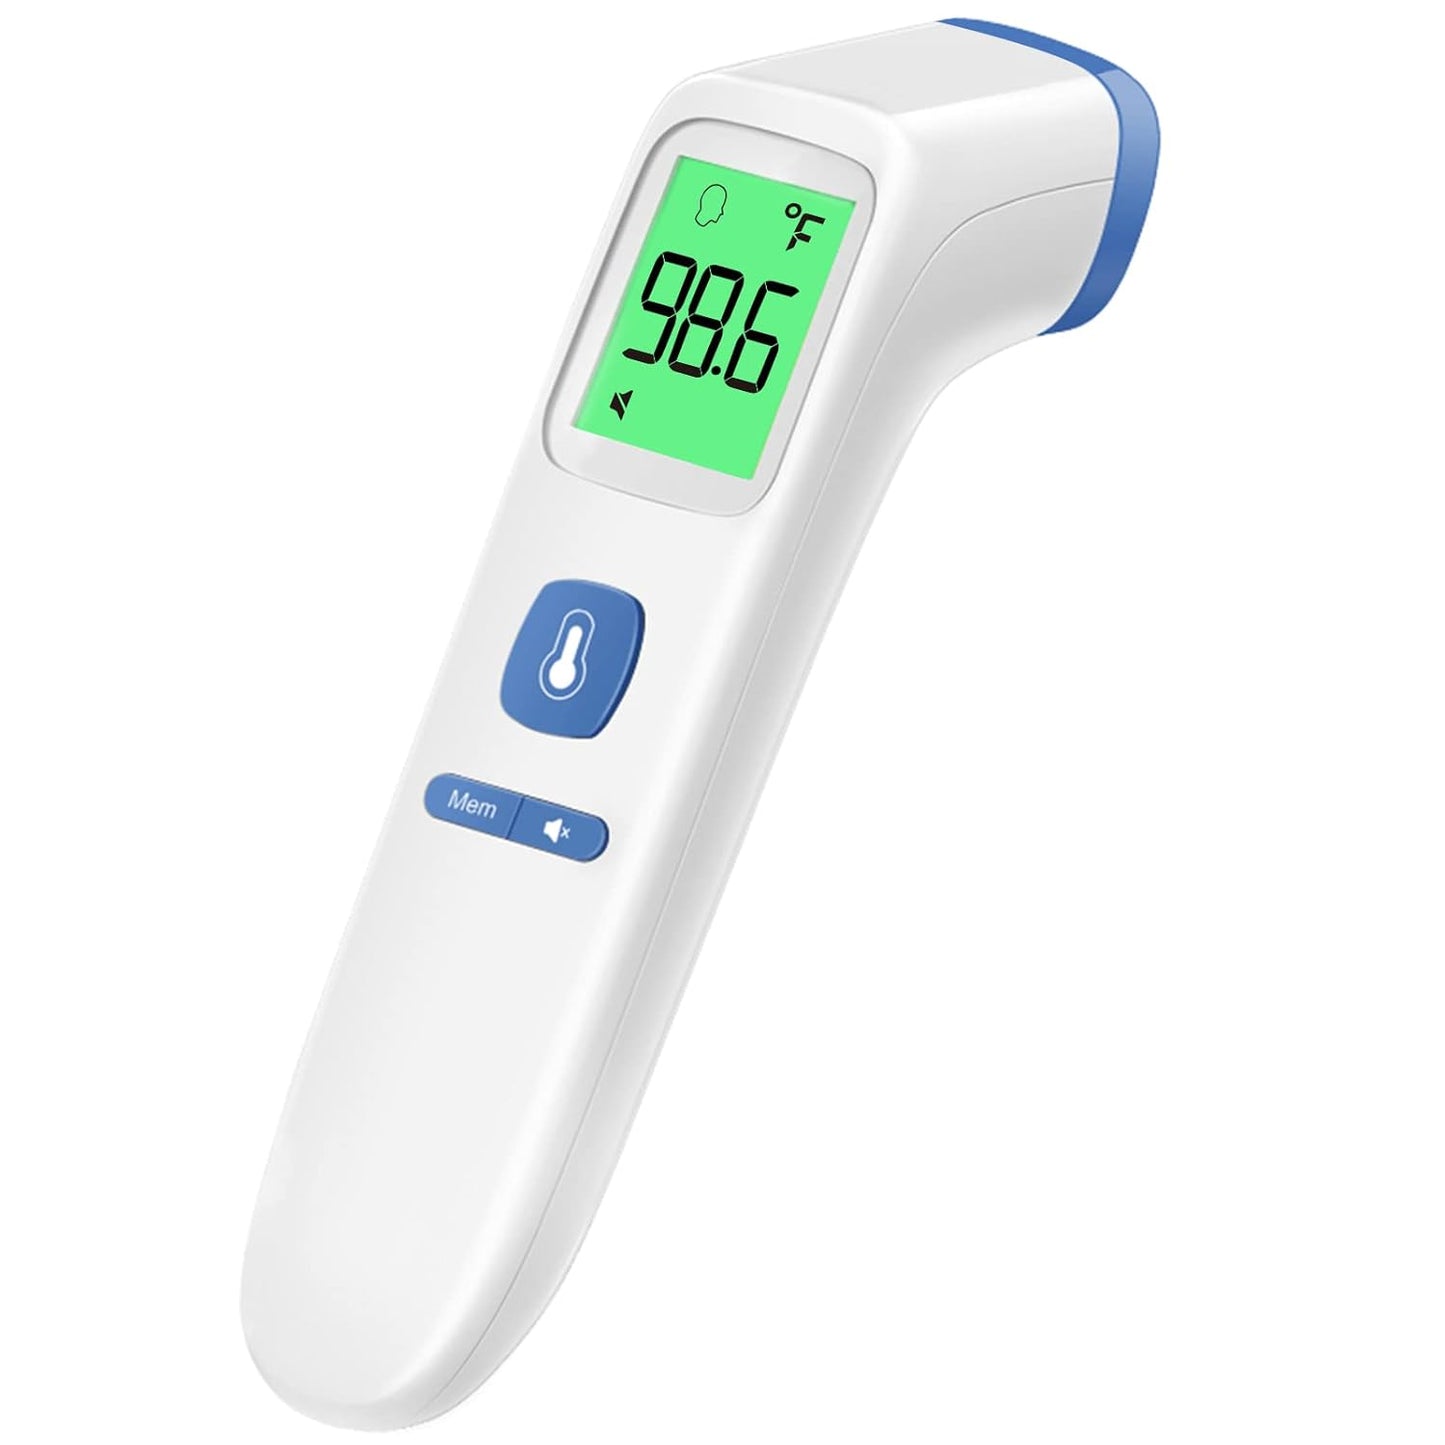 Non-Contact Thermometer for Kids and Adults, Digital Infrared Thermometer for Home use, Color-Coded Screen, 1 Second Result, Accurate & Easy to use (Black)